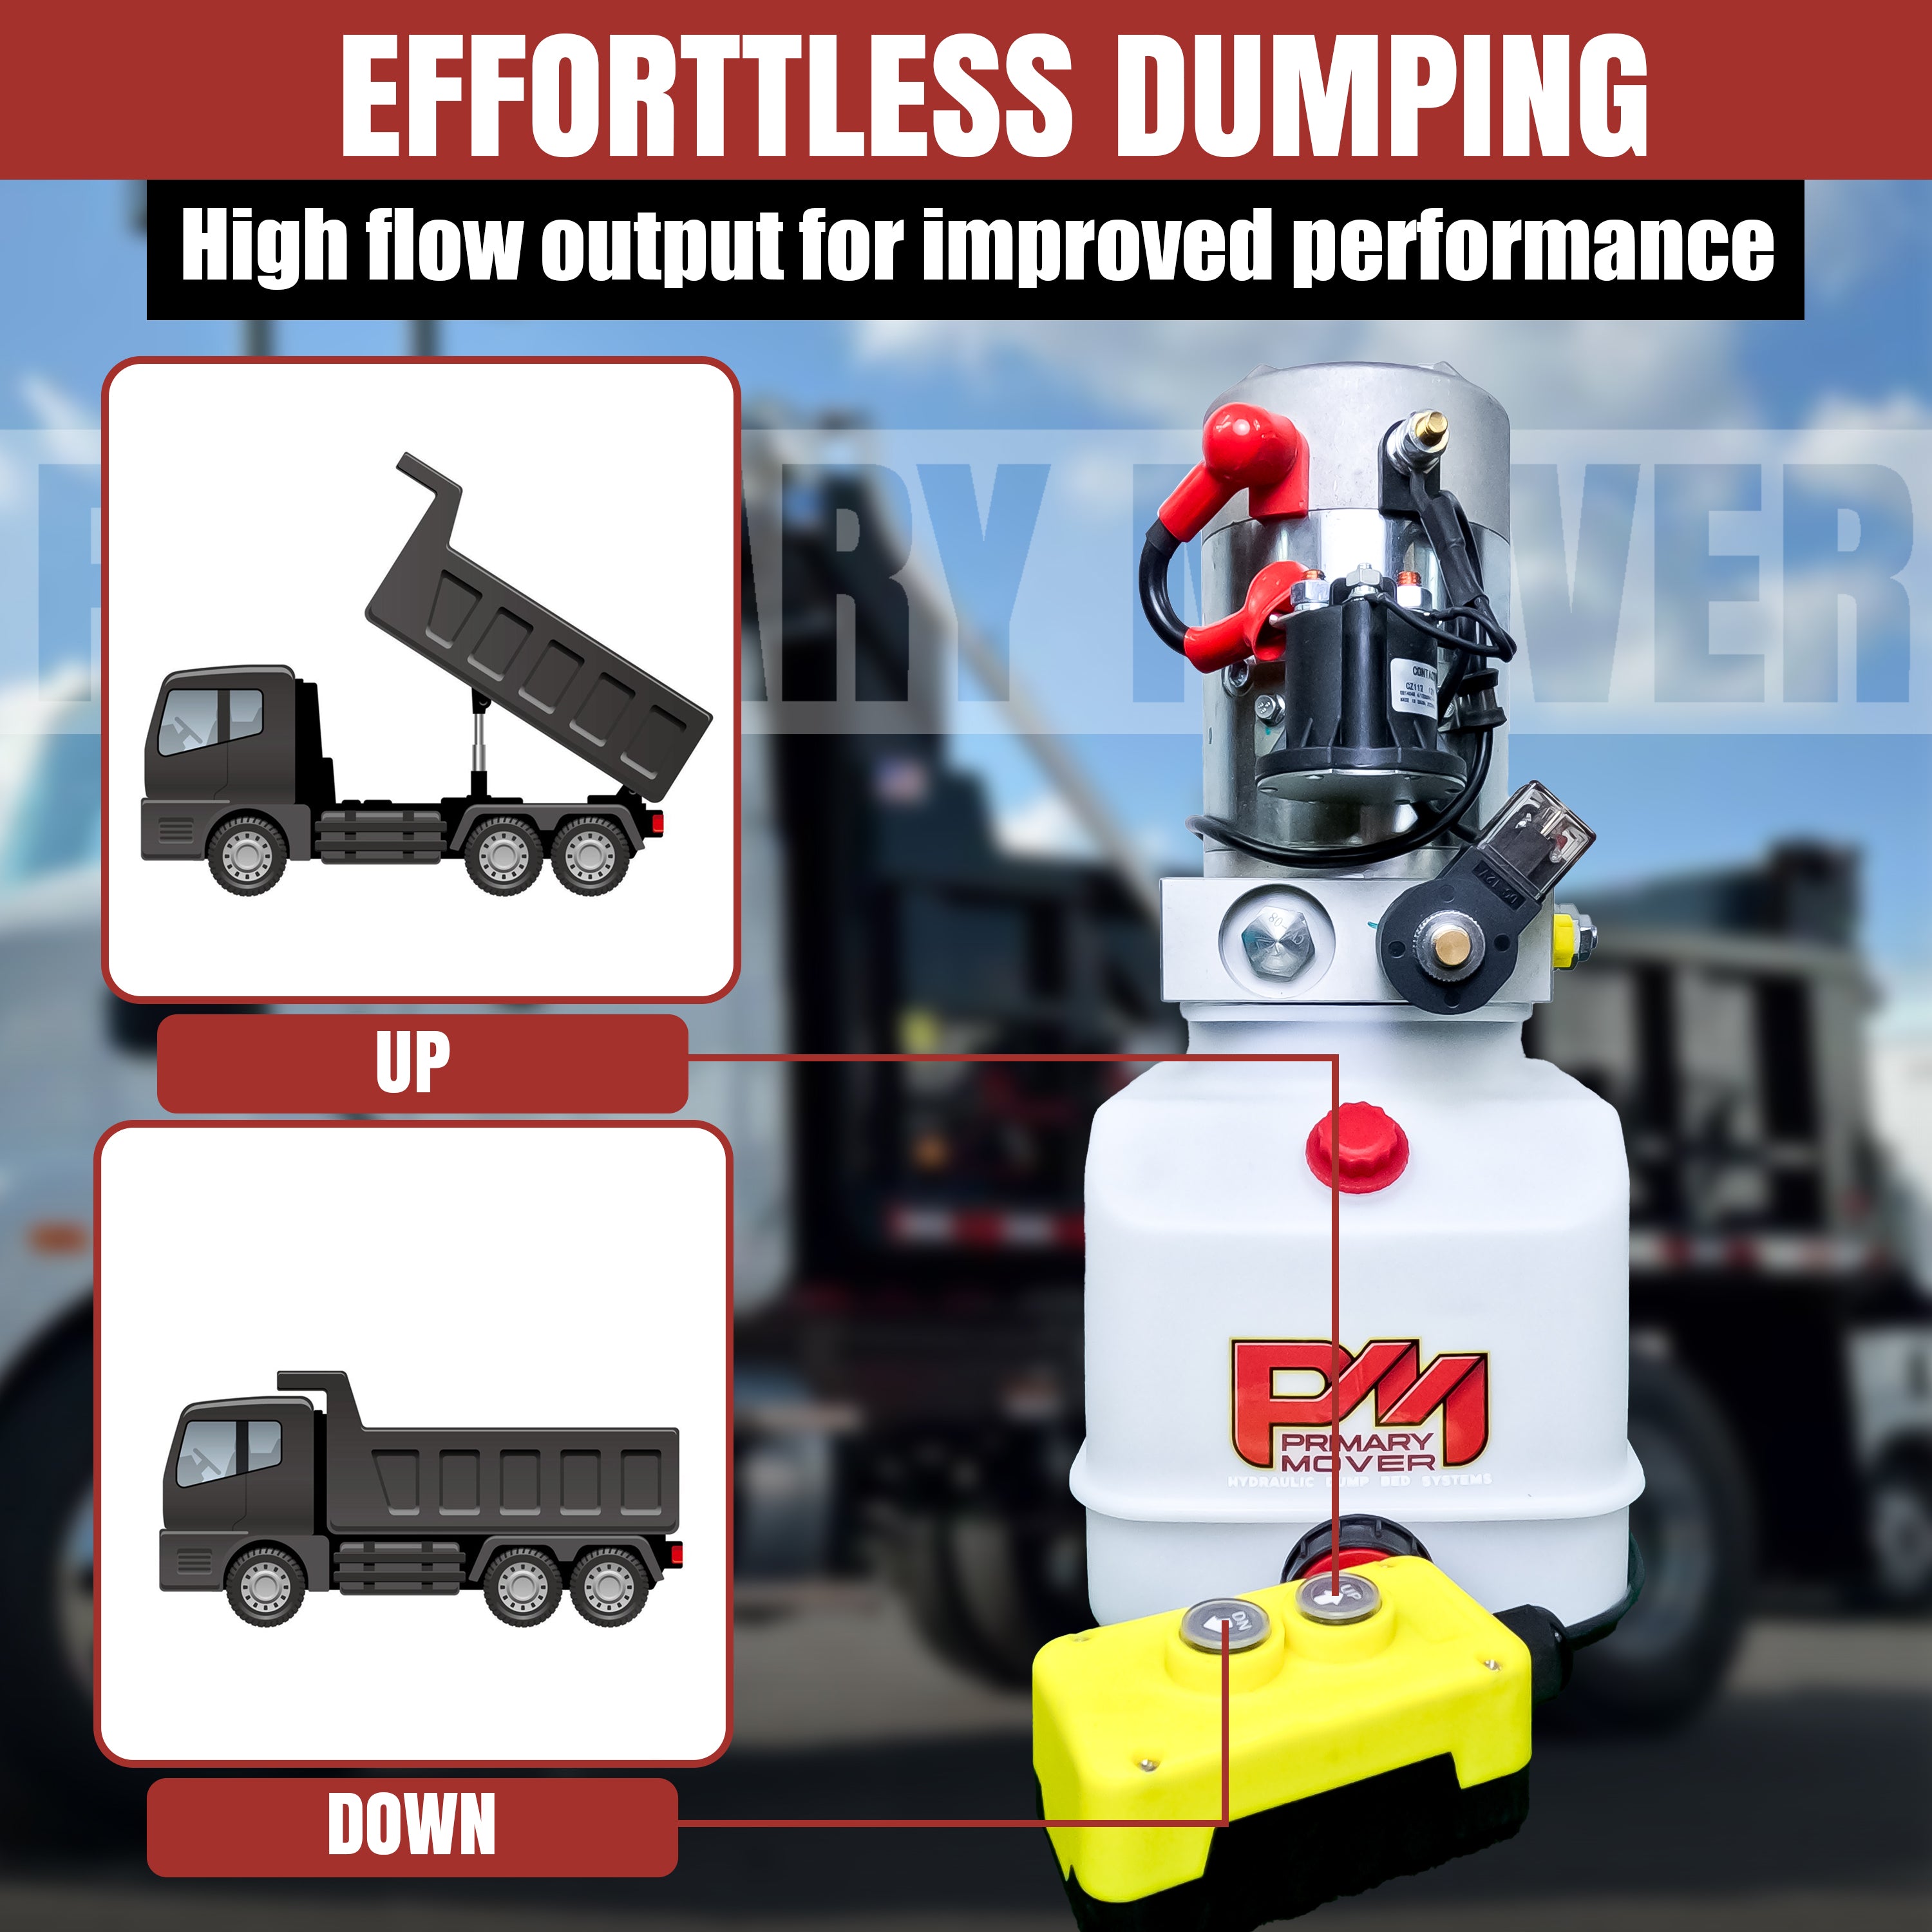 A white and black machine with buttons and a yellow and black object, the Primary Mover 12V Single-Acting Hydraulic Pump features a poly reservoir for efficient hydraulic dump bed systems.